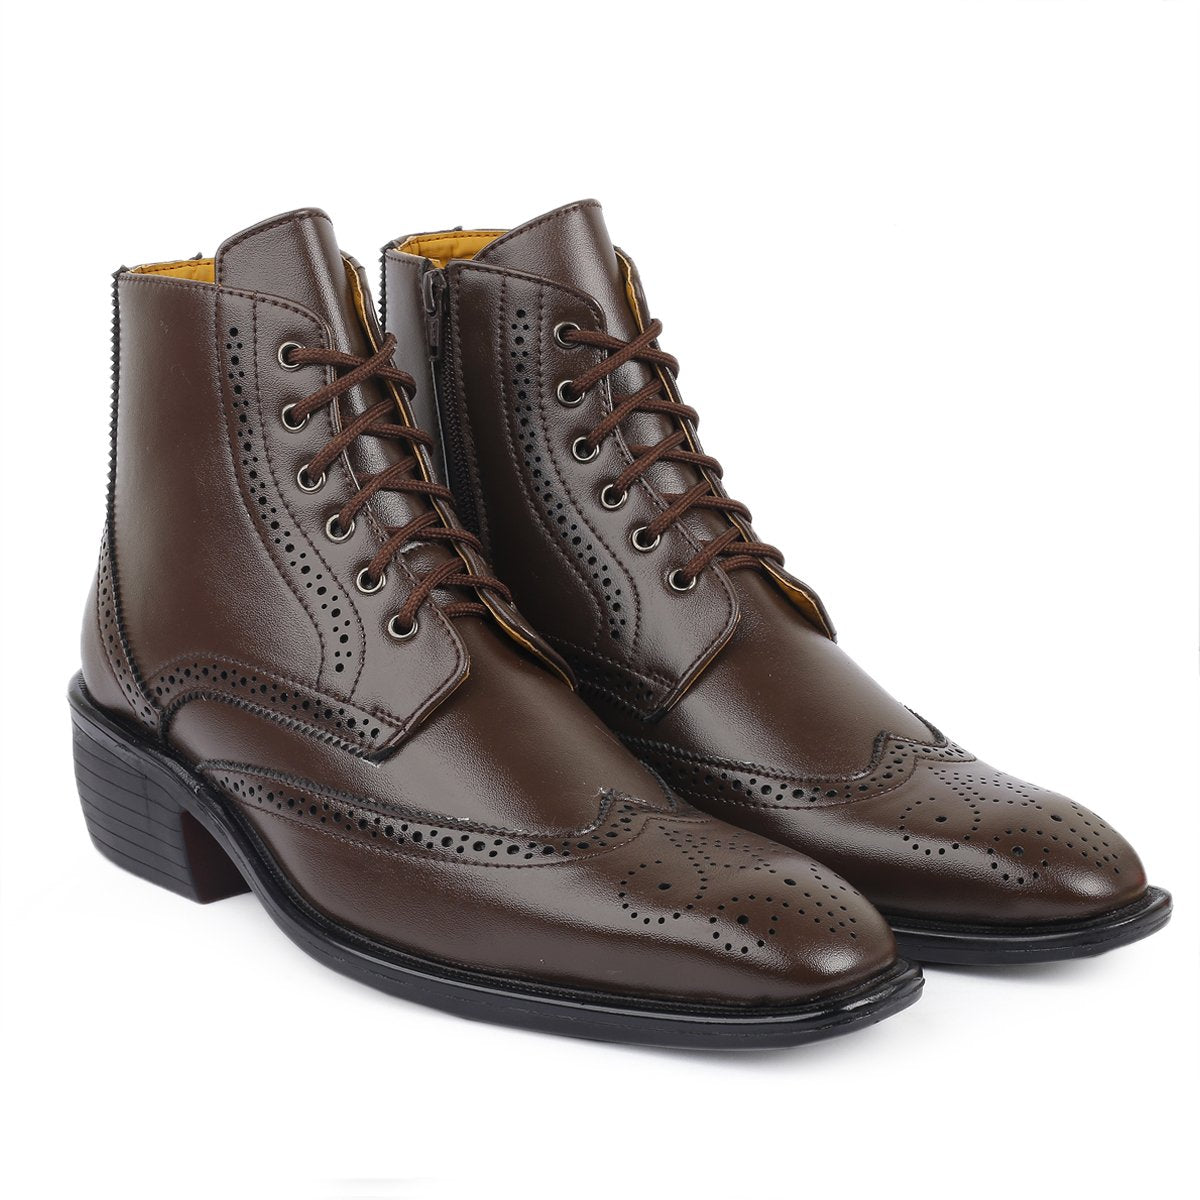 Men's Brown Latest Formal Semi-Formal Ankle Zipper Lace-Up Brogue Boots